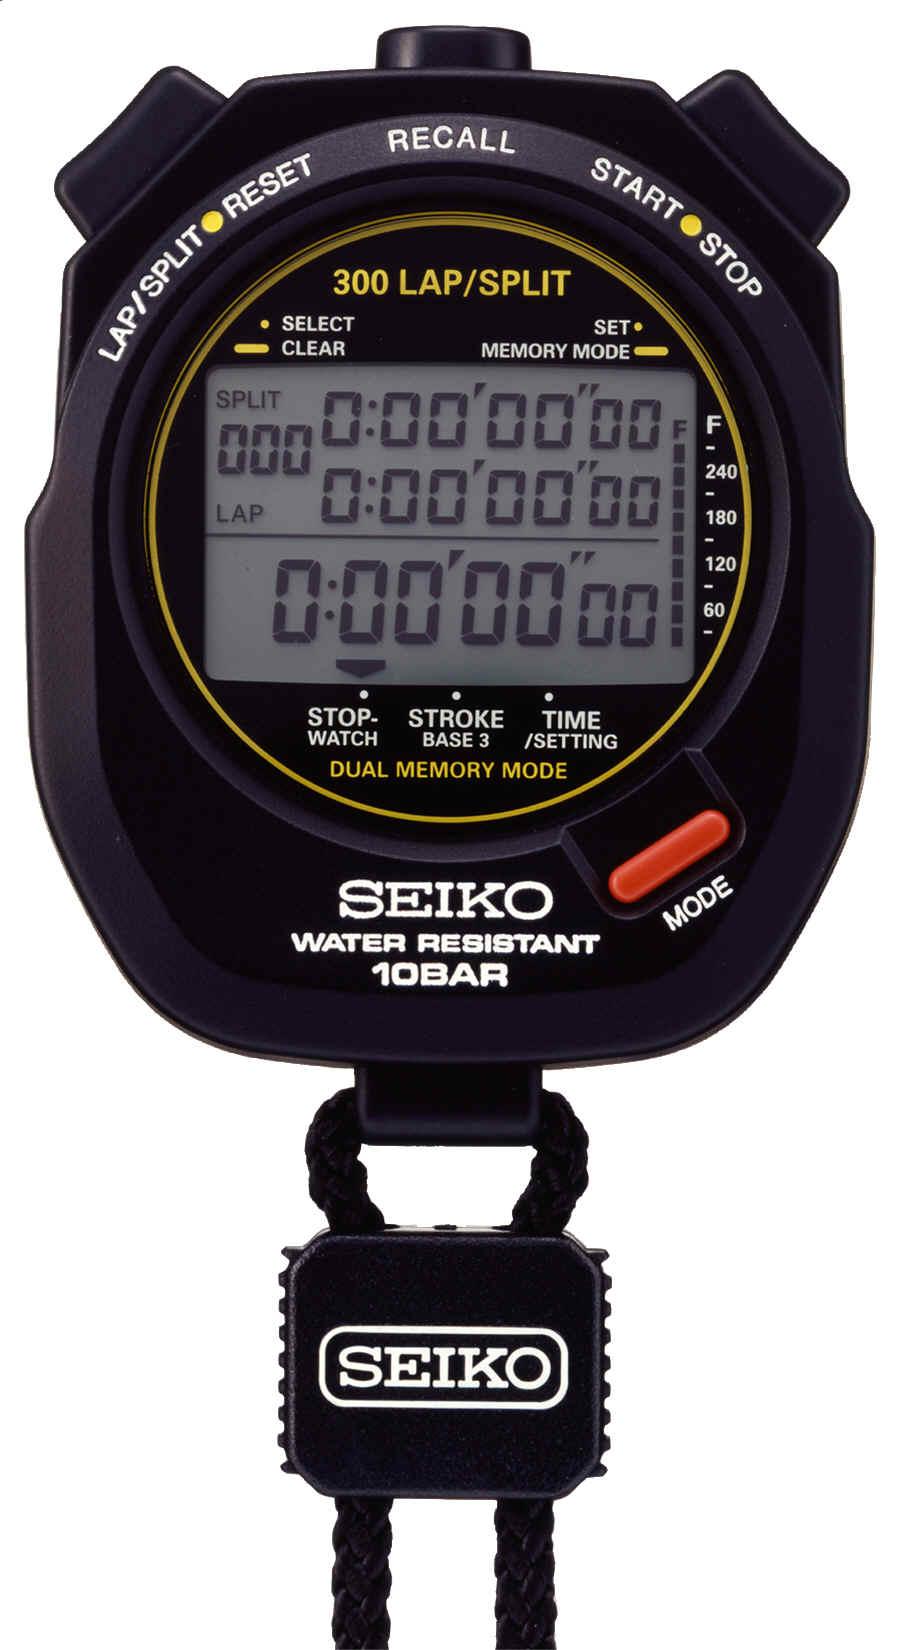 Most stopwatches use Elapsed Time, although some more expensive and feature-rich stopwatches can also record and store times in Time of Day format.